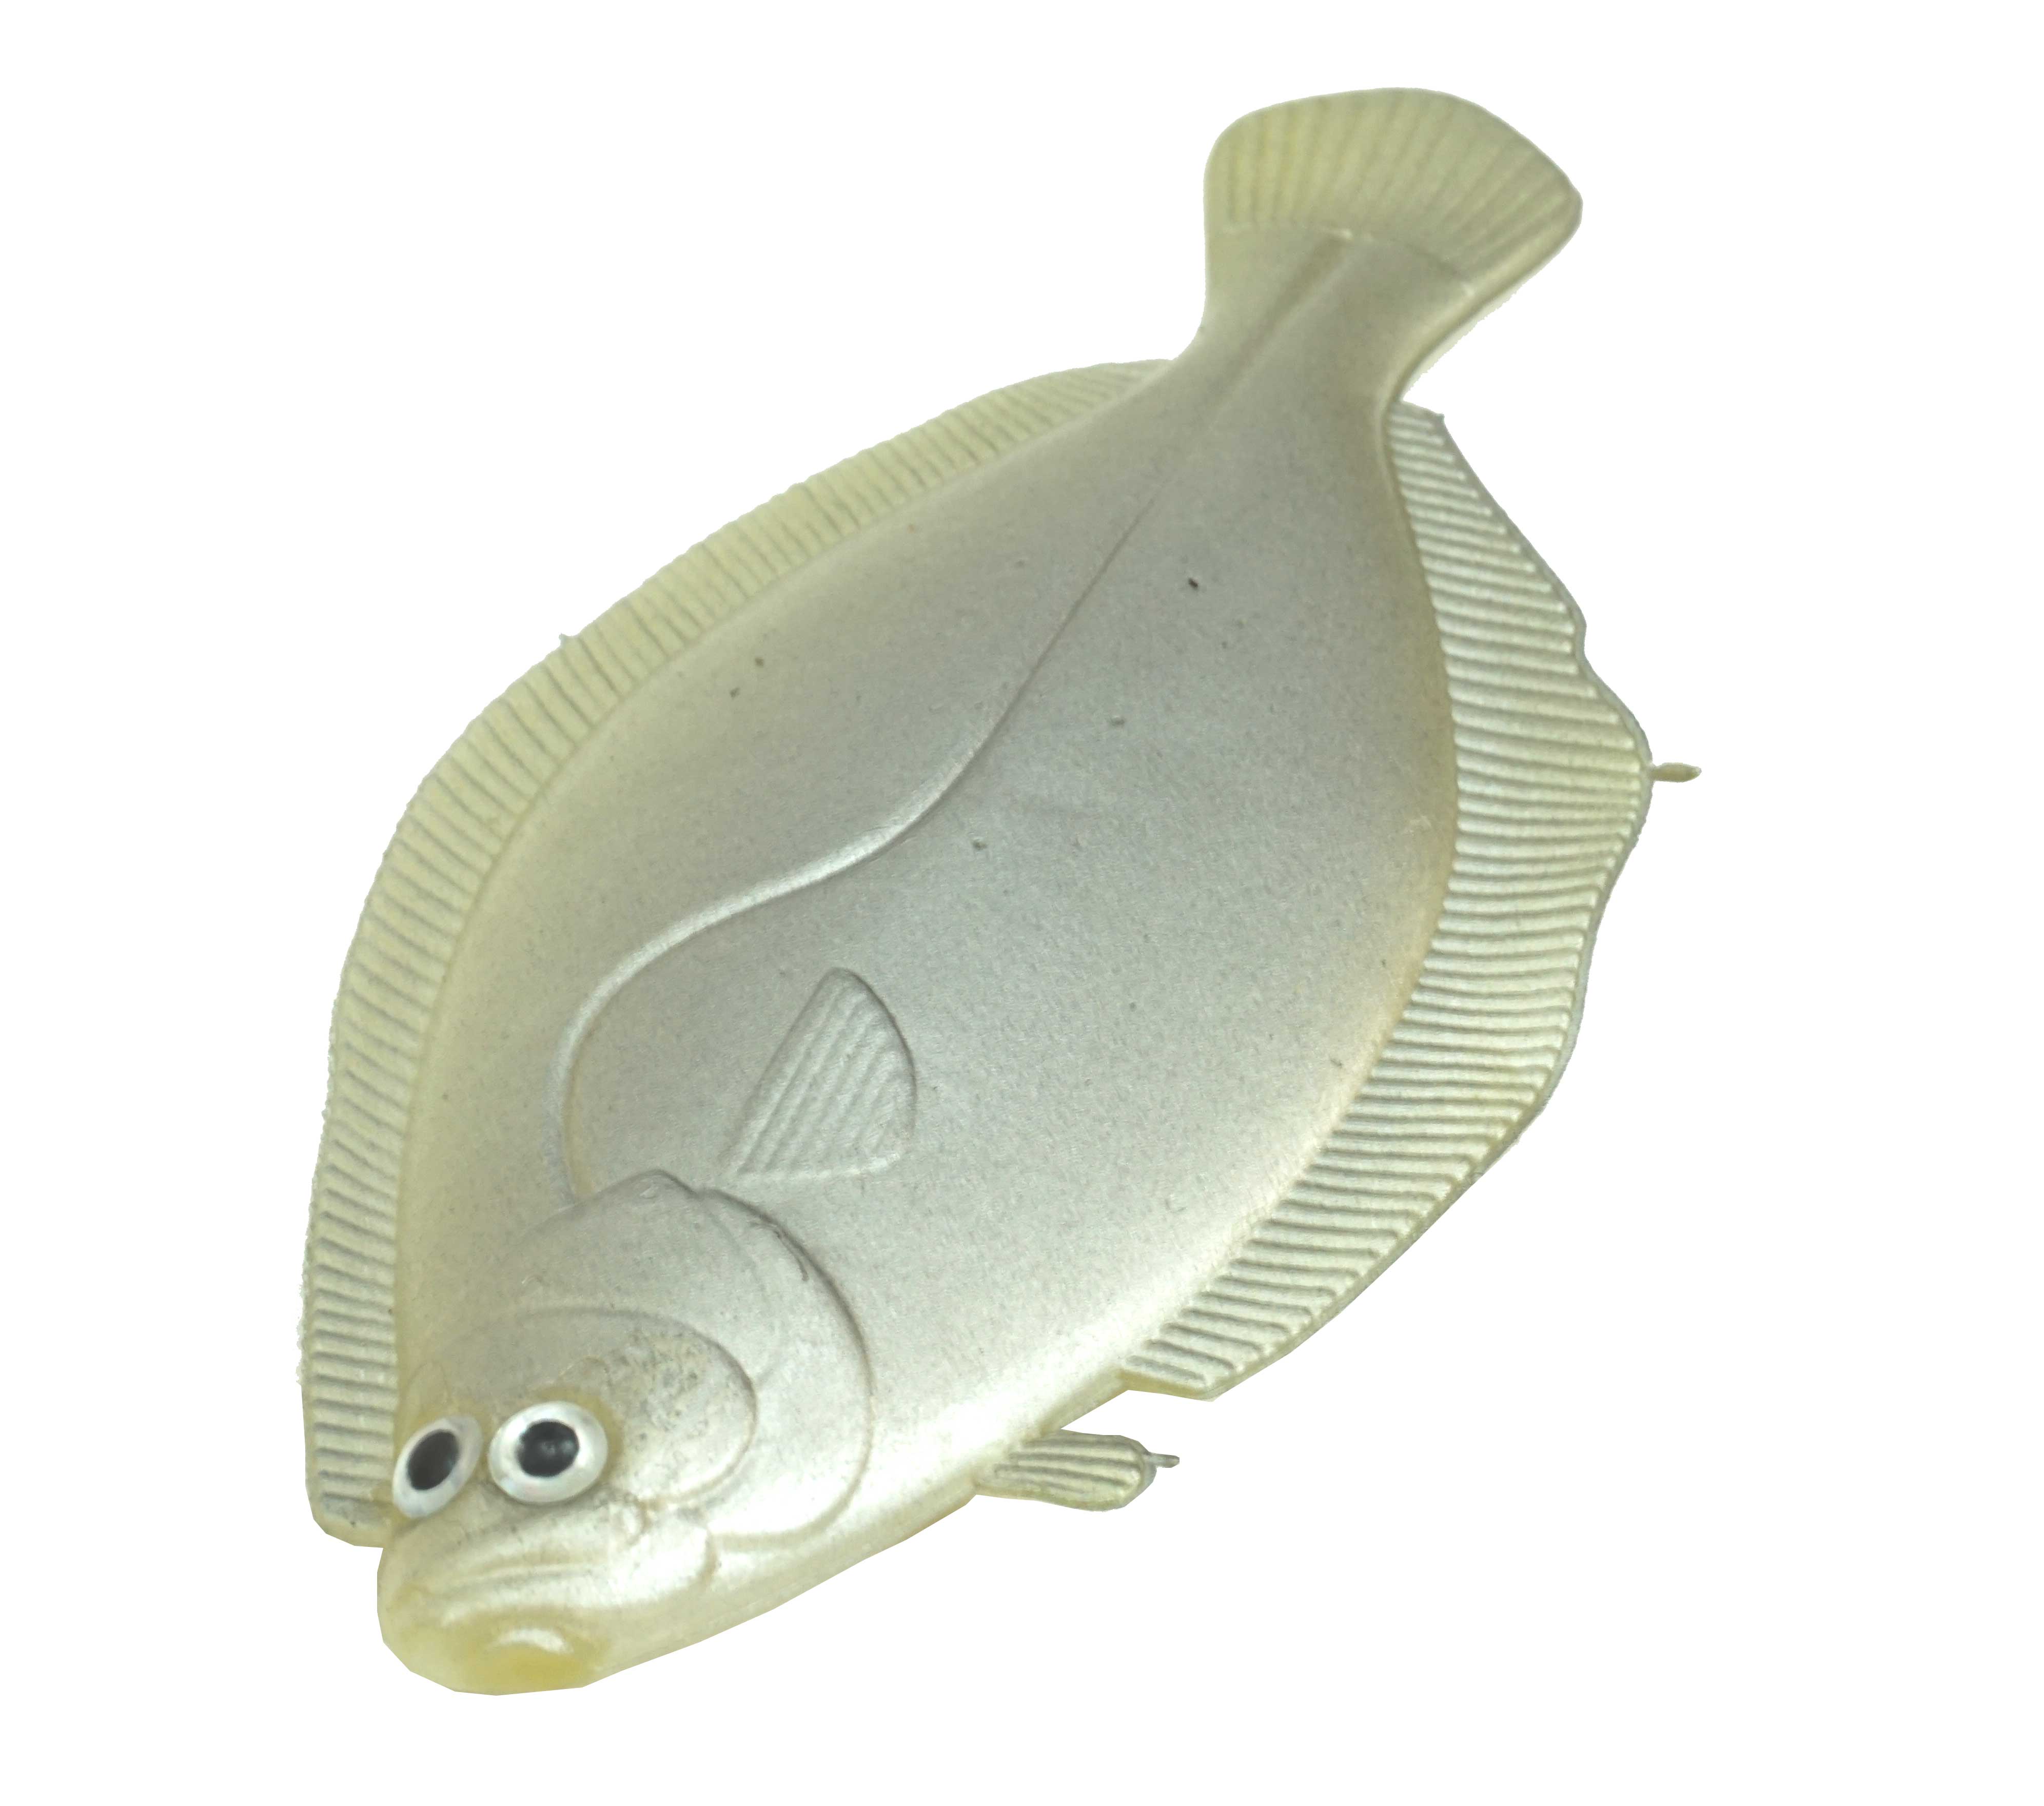 Artificial Flounder 5" Light Gray - Almost Alive Lures